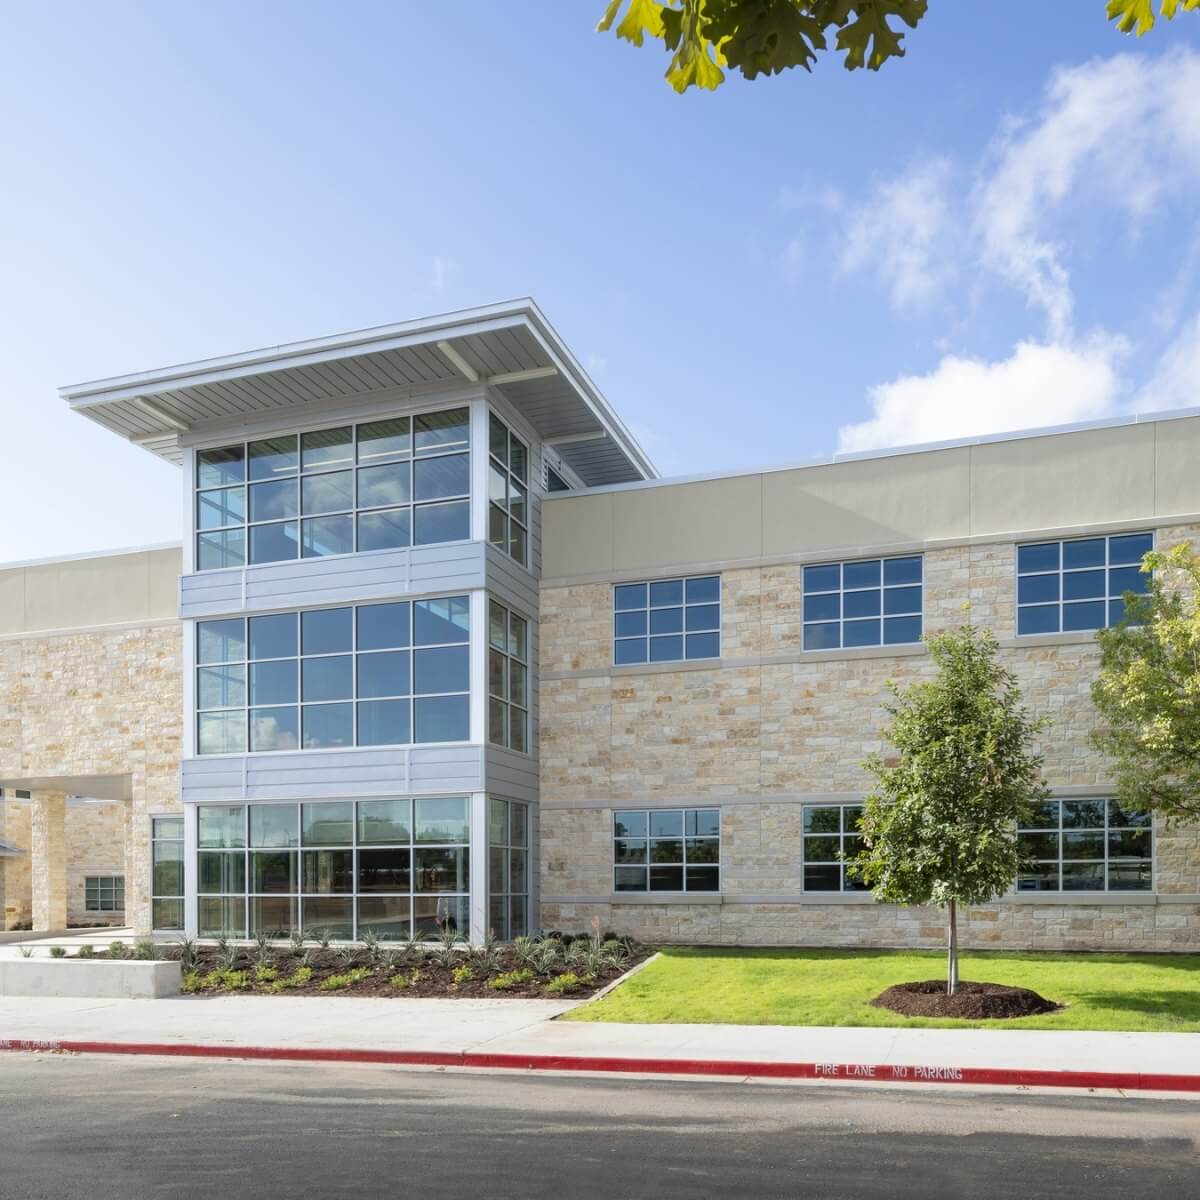 Dripping Springs High School Addition, Dripping Springs ISD